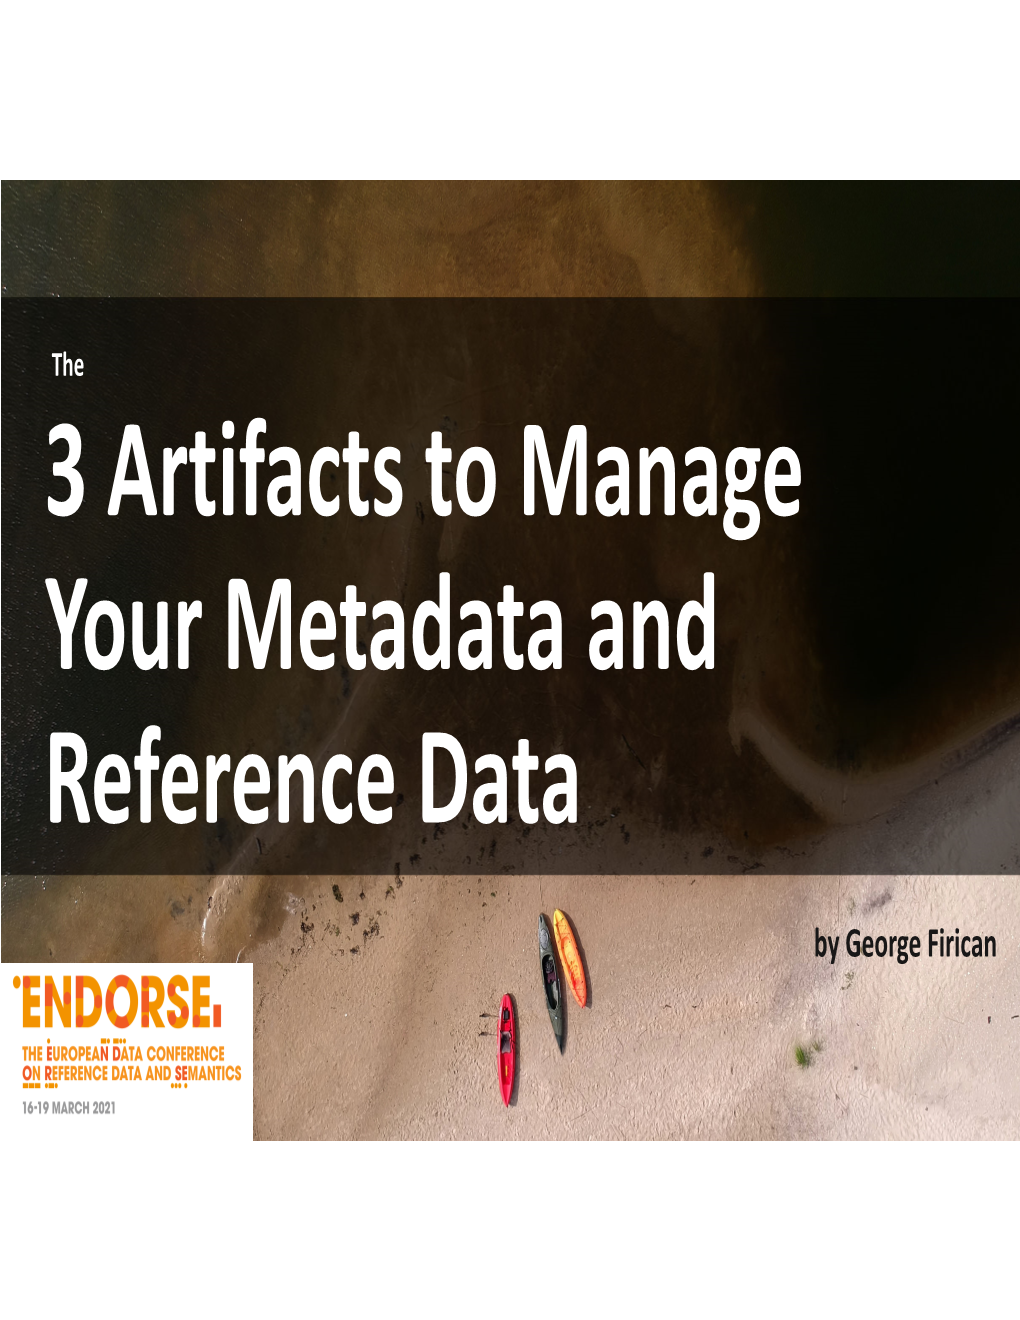 3 Artifacts to Manage Your Metadata and Reference Data